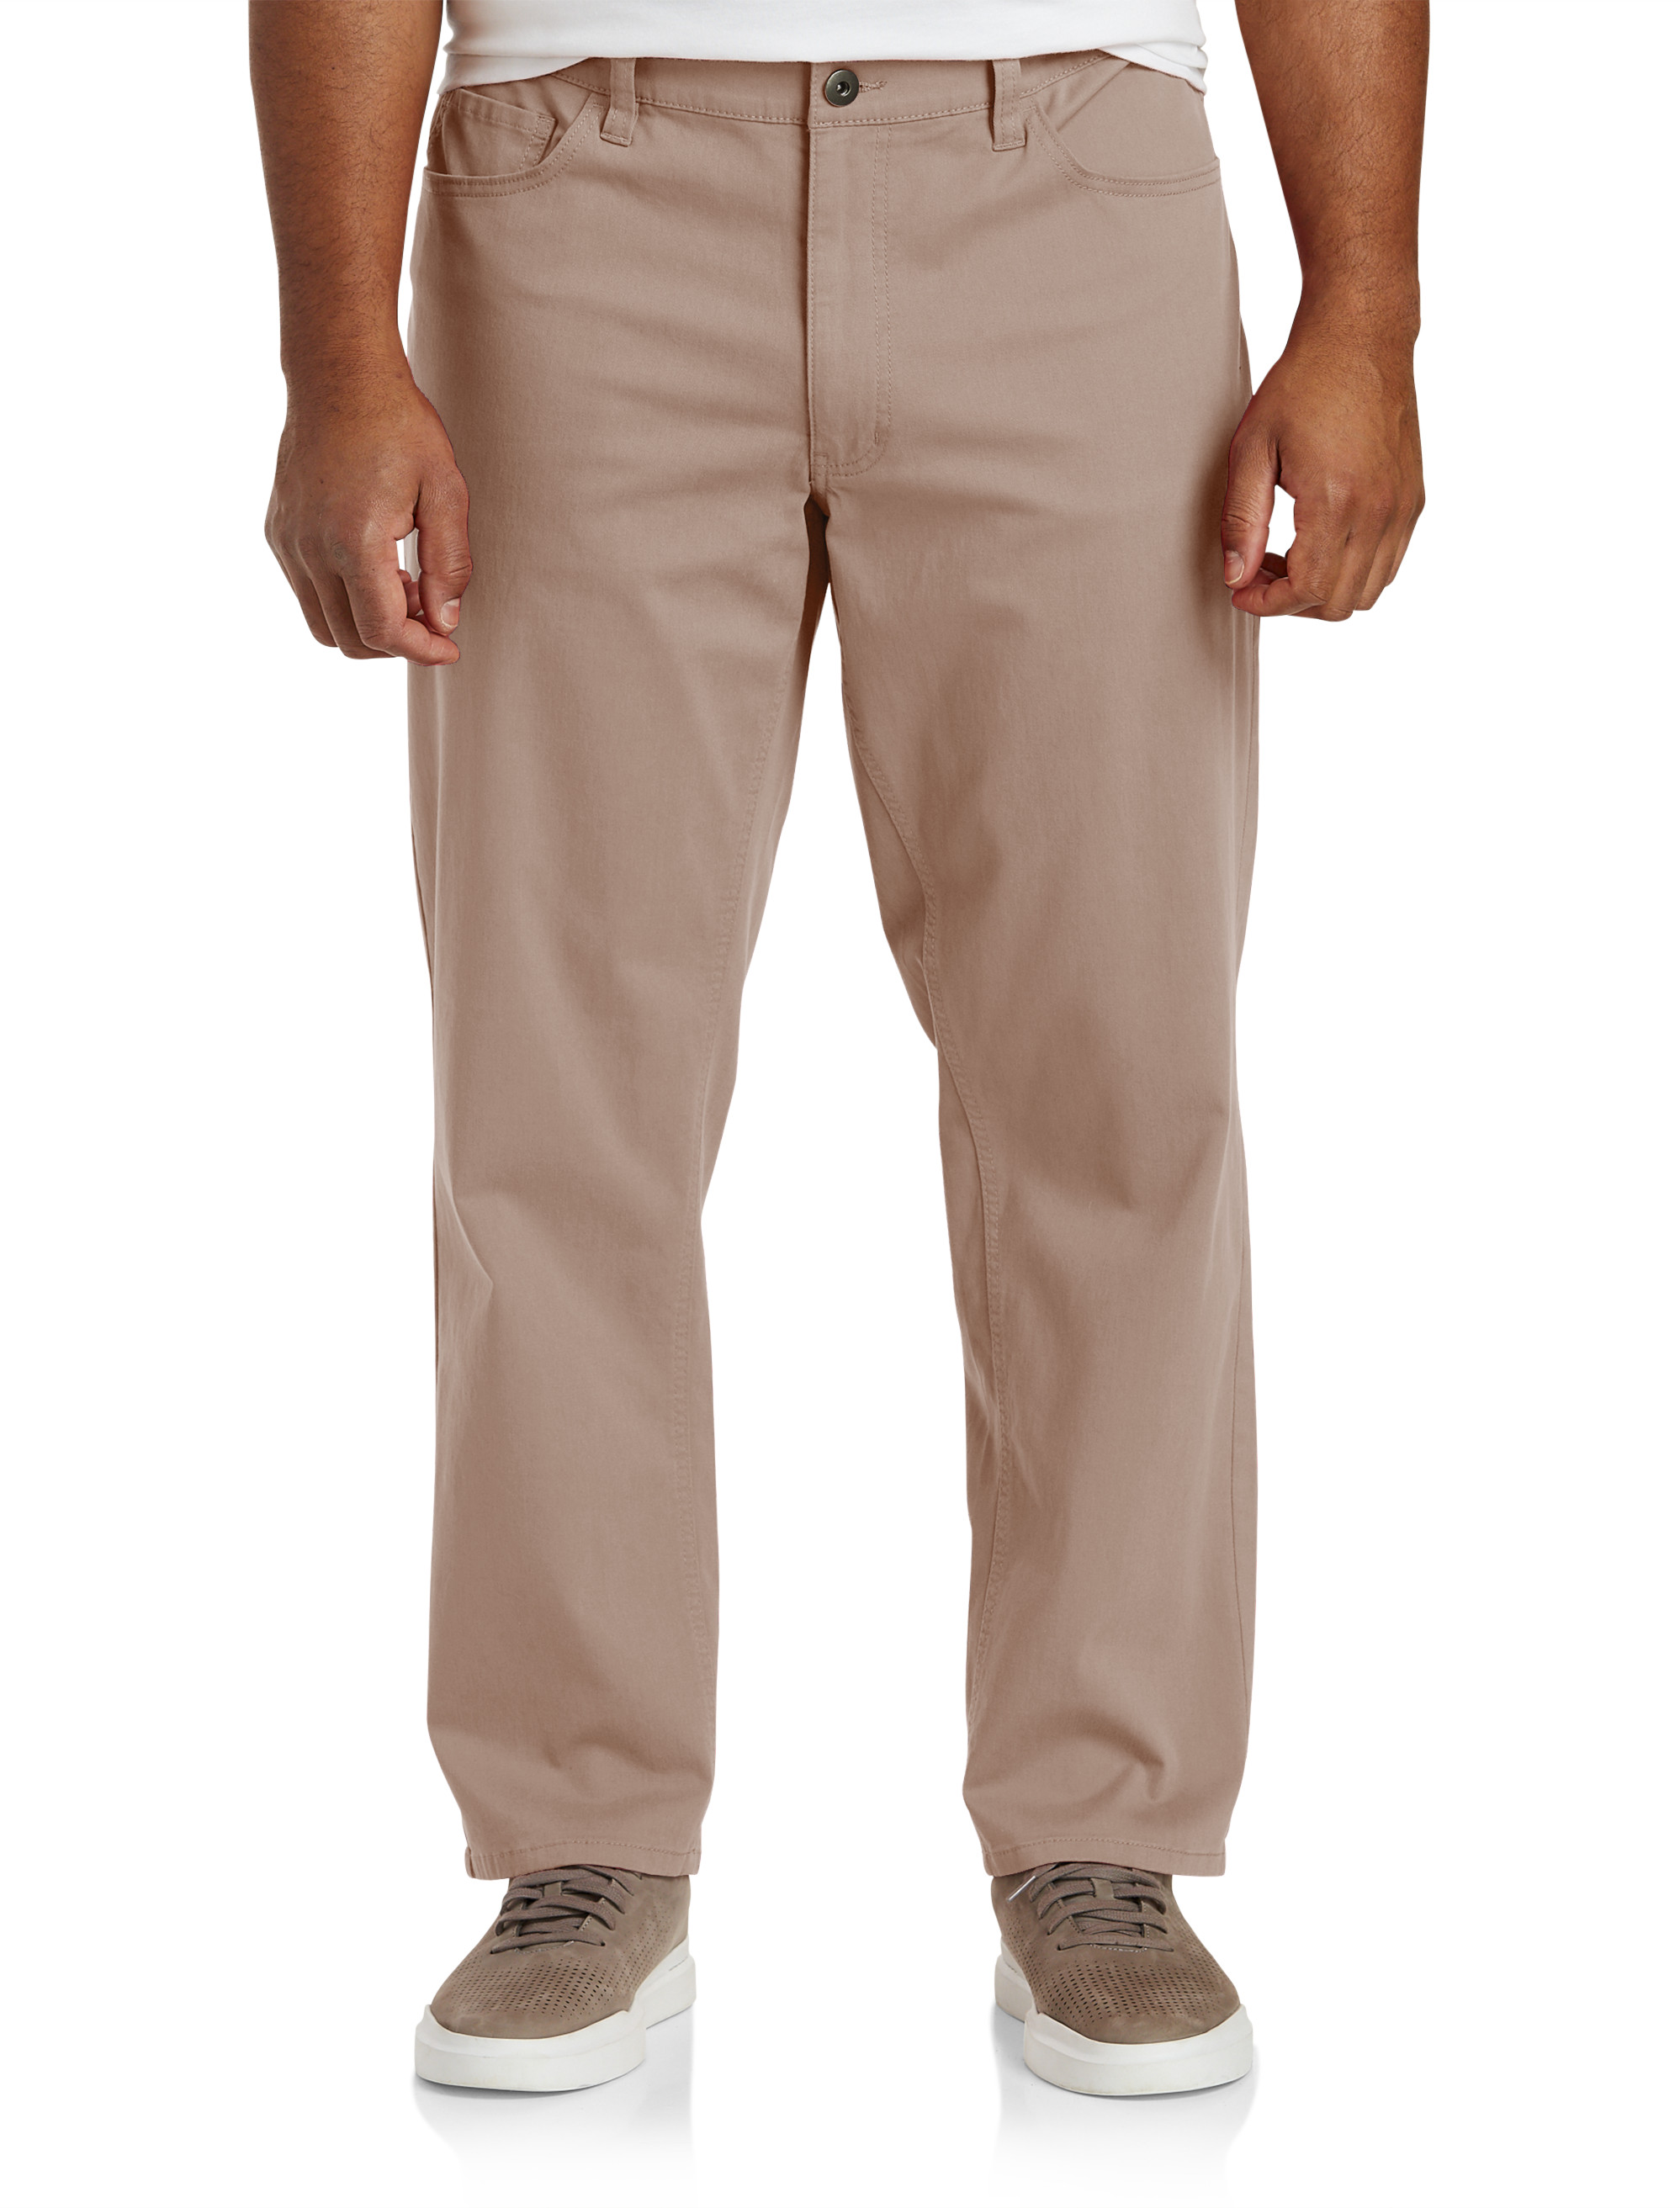 Big and Tall Men's Chino Pants size 3XL-7XL Waist From 42 50 Inches 